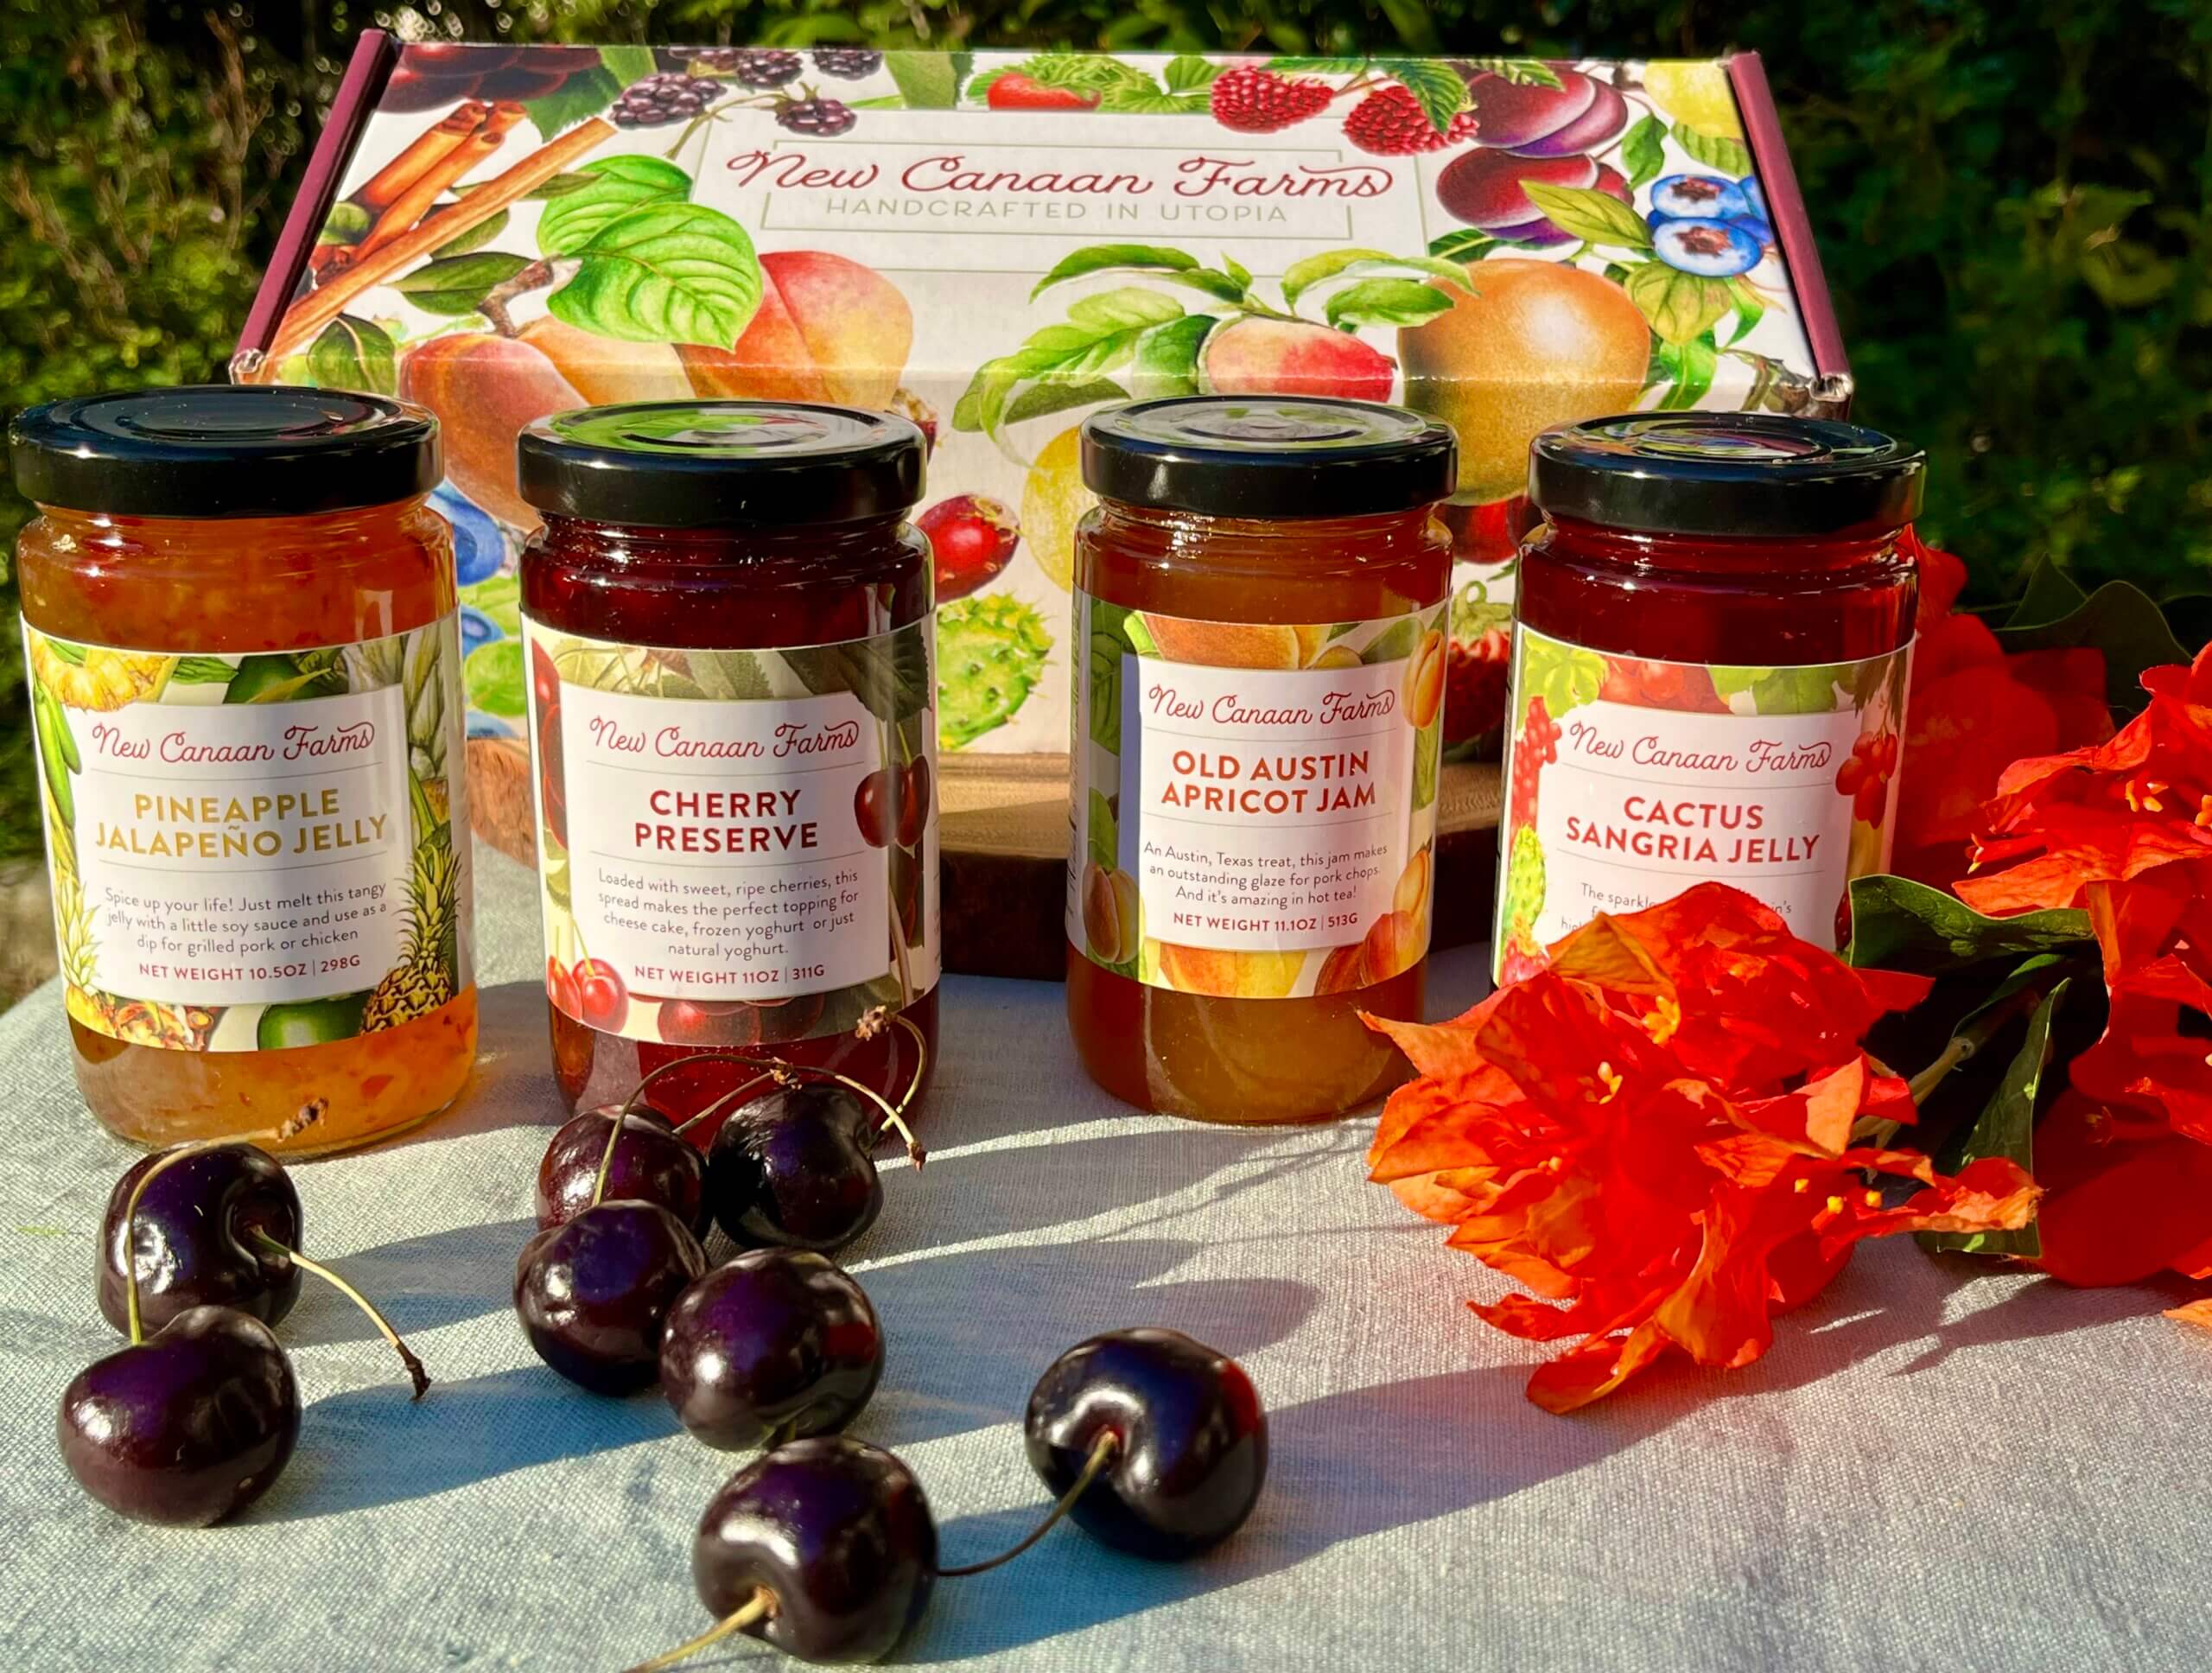 A collection of New Canaan Farms jams of fruit that ripens in Spring; Old Austin Apricot Jam, Cactus Sangria Jelly, Cherry Preserves and Pineapple Jalapeño Jelly